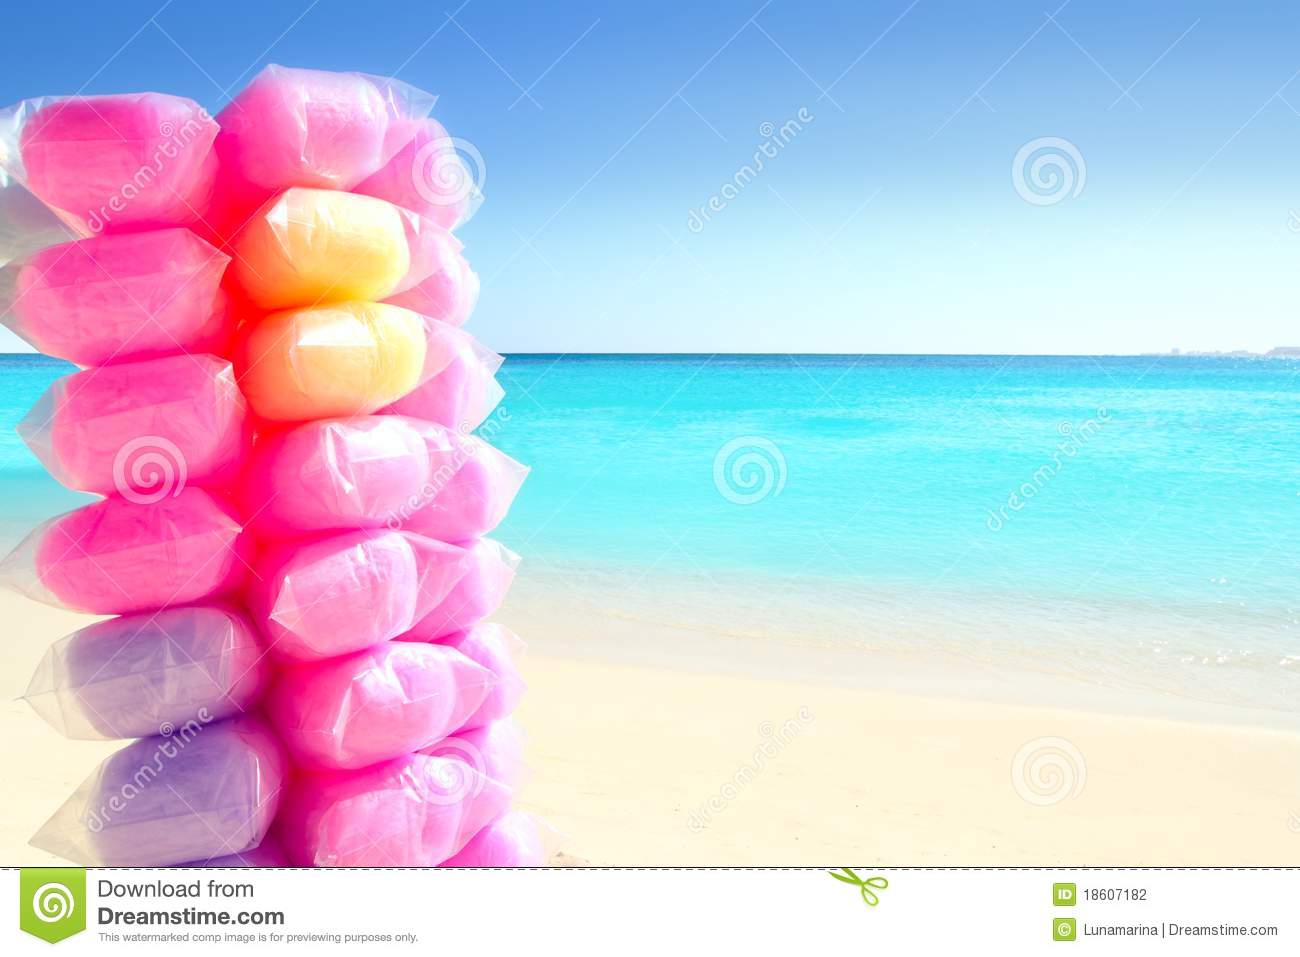 Cotton Candy Colorful In Caribbean Beach Stock Photography   Image